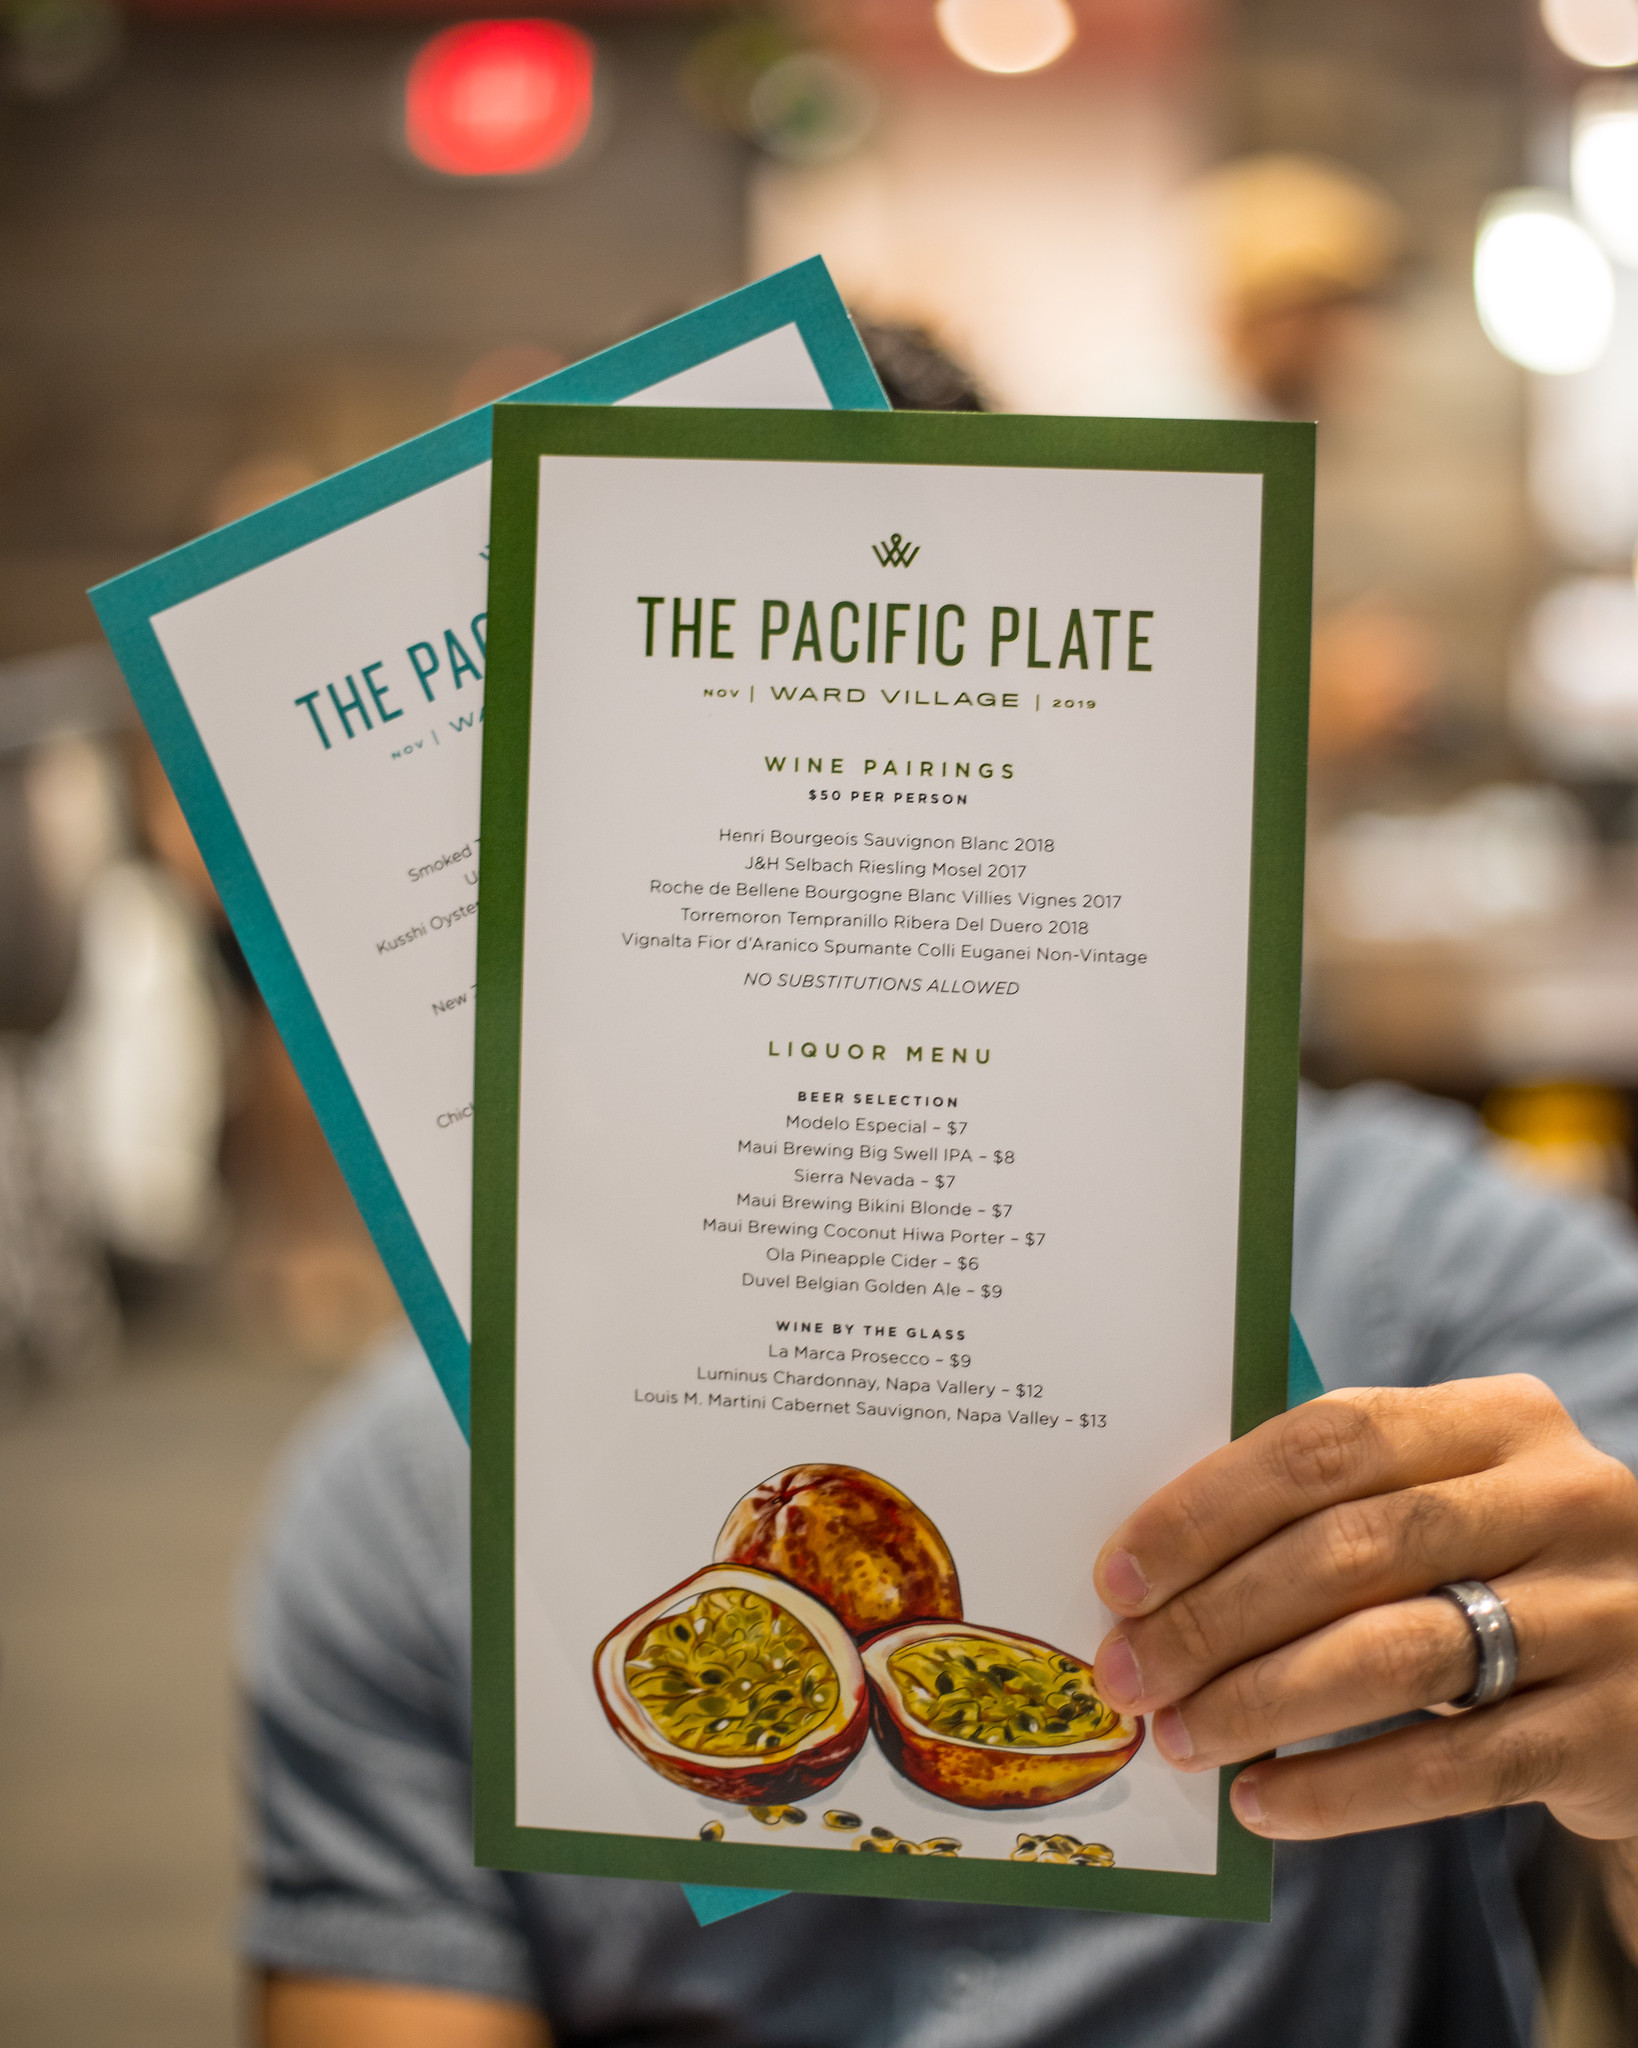 The Pacific Plate by Ward Village